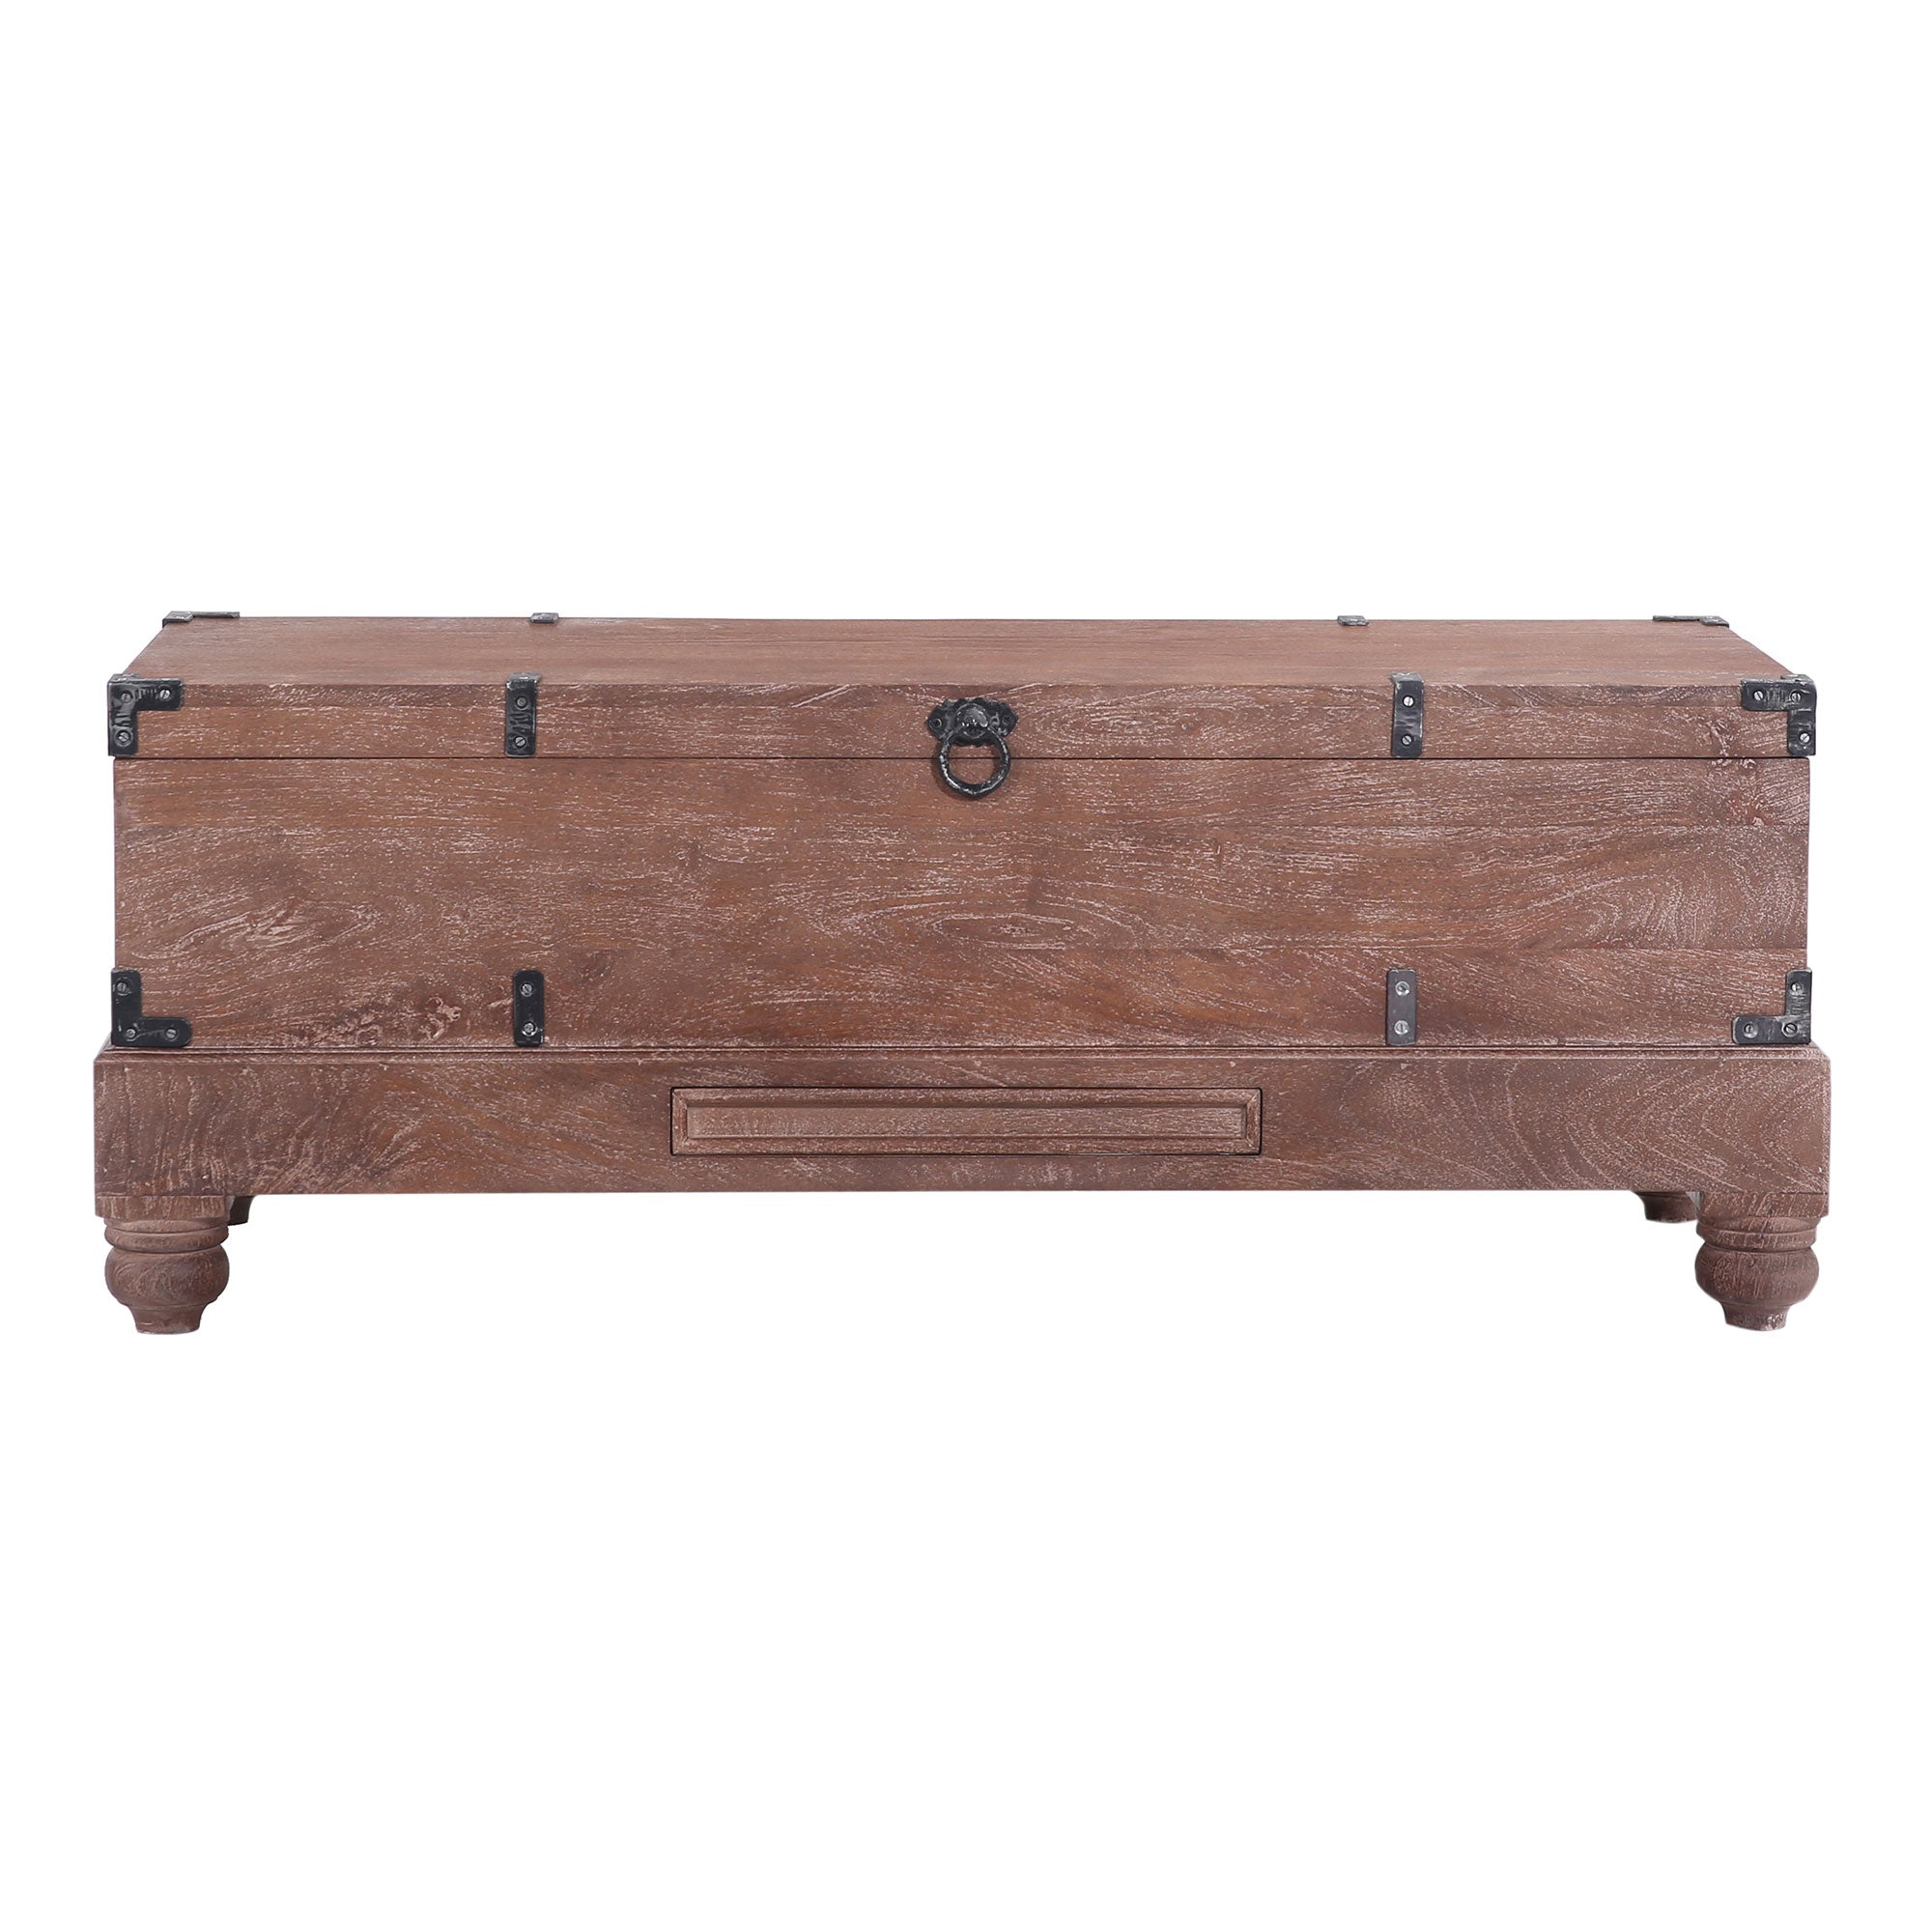 Nerio Nomad Wooden Storage Bench in Brown Distressed Finish in Ottomans & Benches by VMInnovations